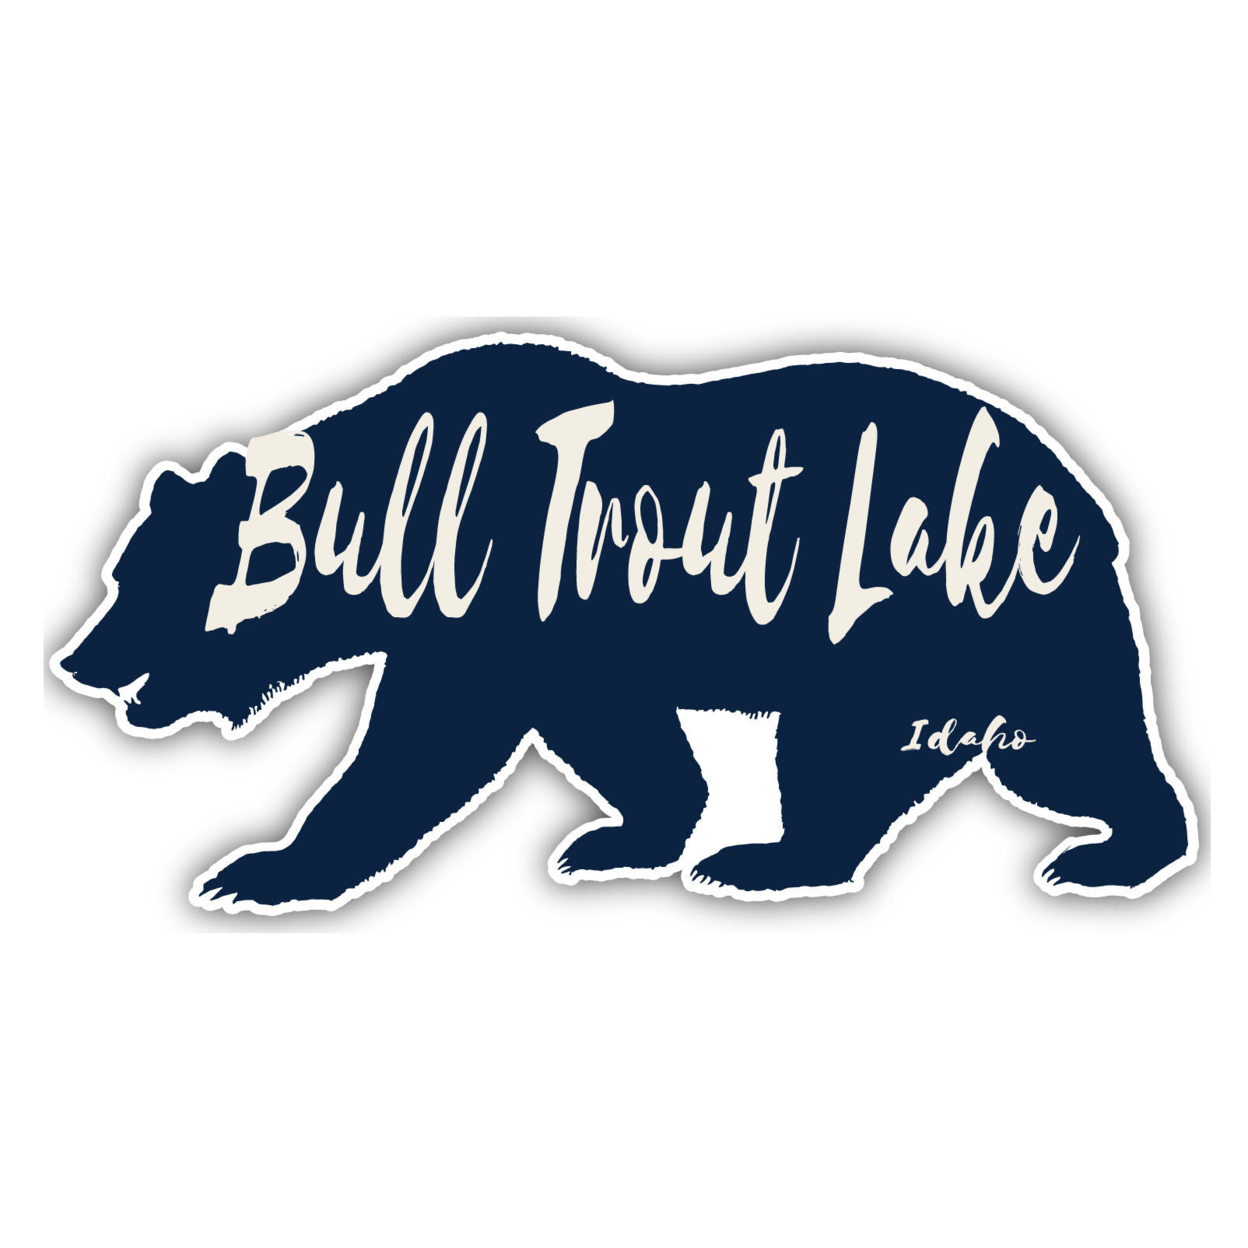 Bull Trout Lake Idaho Souvenir Decorative Stickers (Choose Theme And Size) - 4-Pack, 10-Inch, Bear